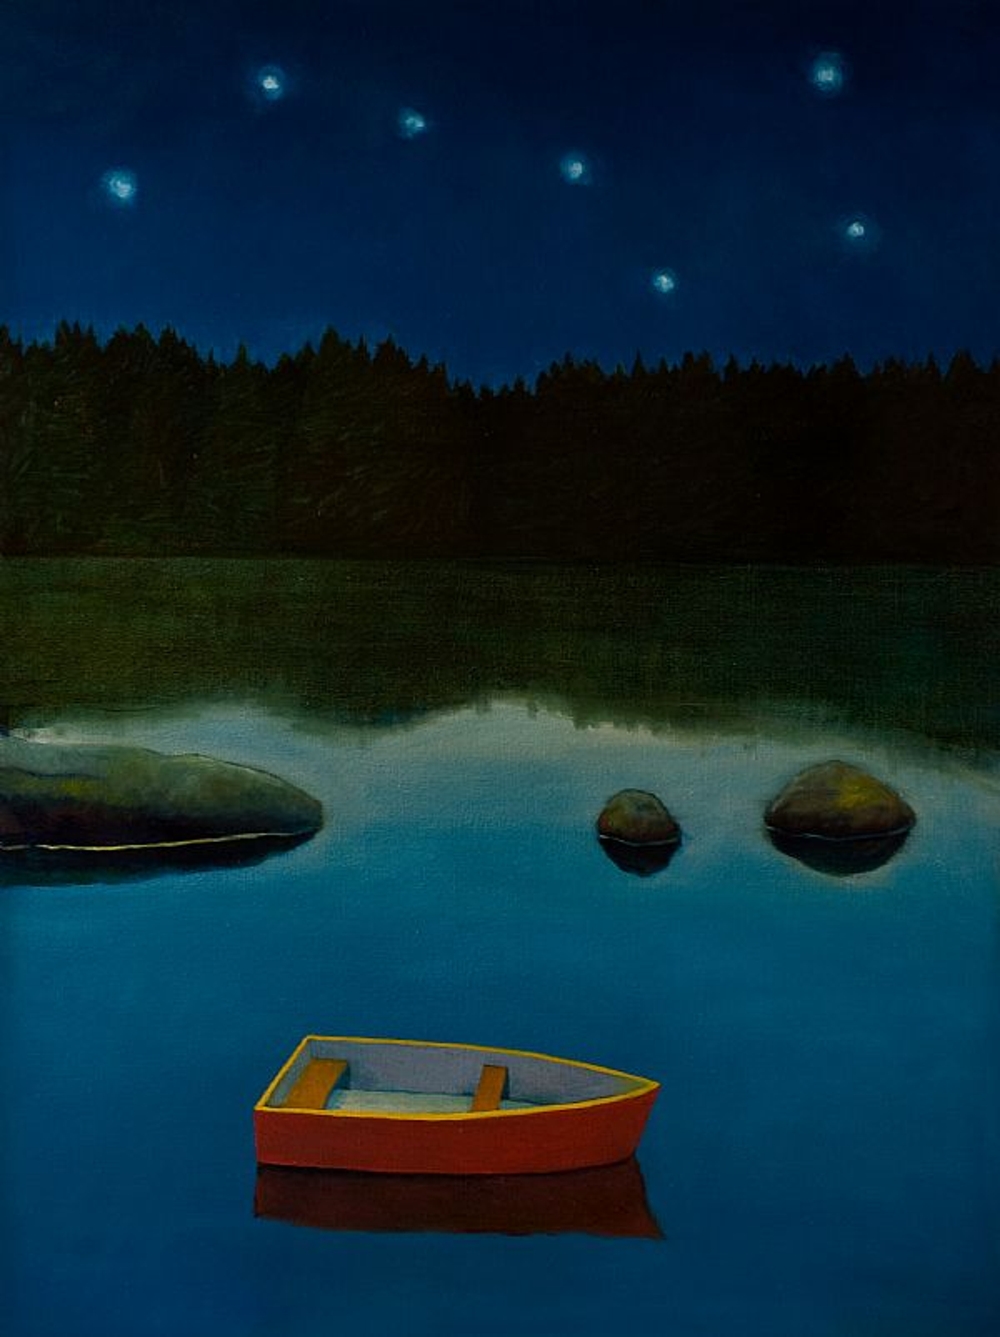 oil on linen 36'x48''
This painting was done after a trip to Isle Royale, remembering the sense of peace and quiet under the stars.  It was used for the cover of the book, Naked in the Stream: The Isle Royale Stories.

private collection